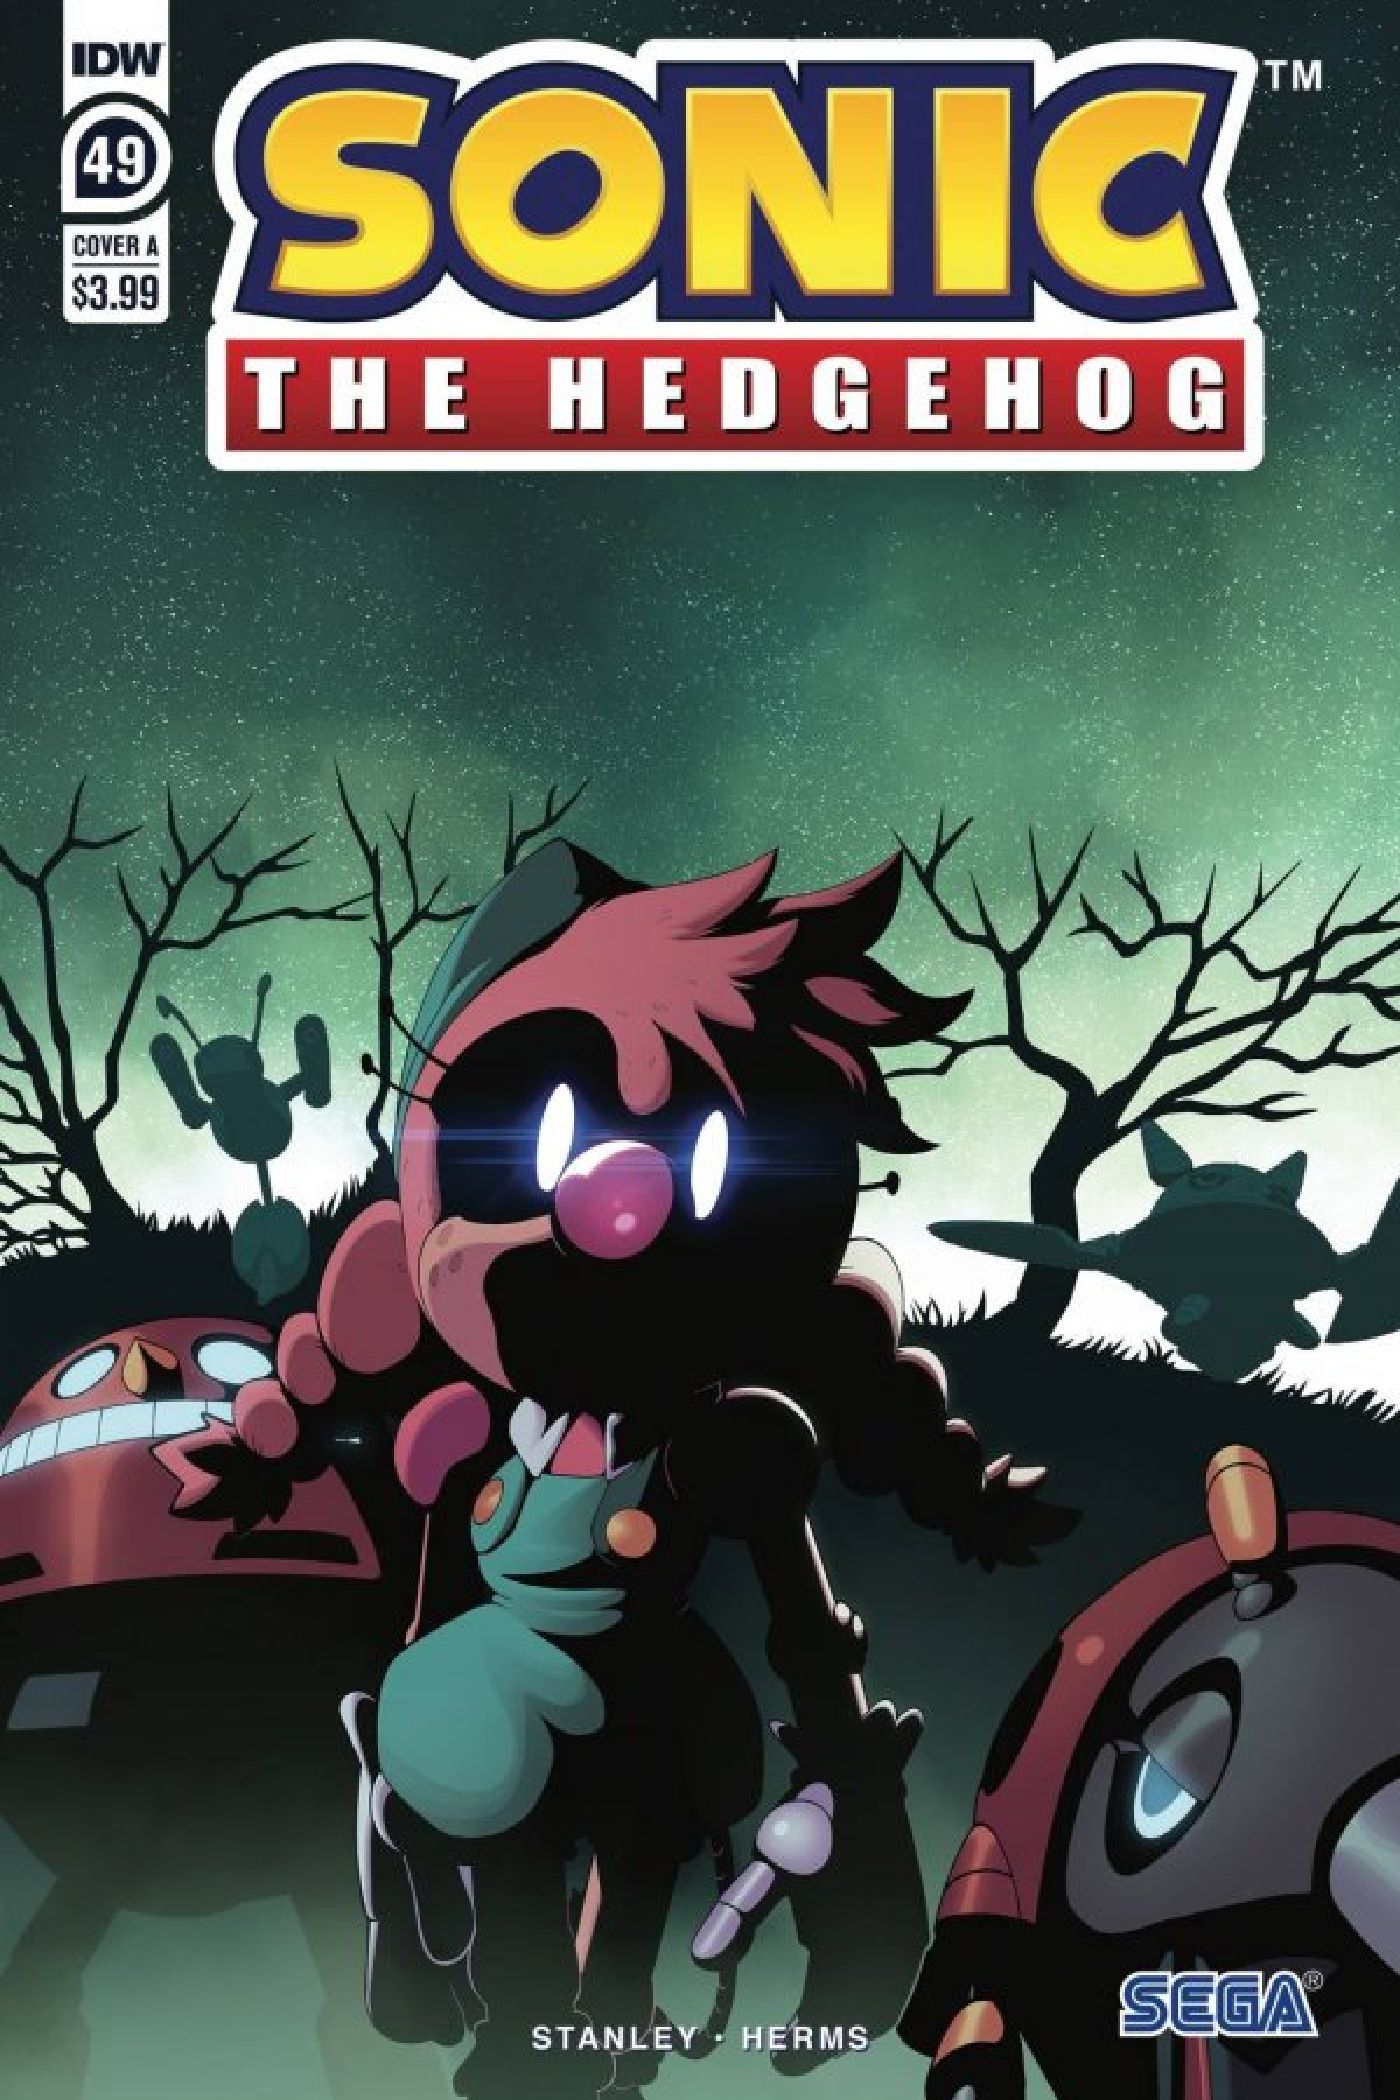 Cover of Sonic #49 featuing Belle.